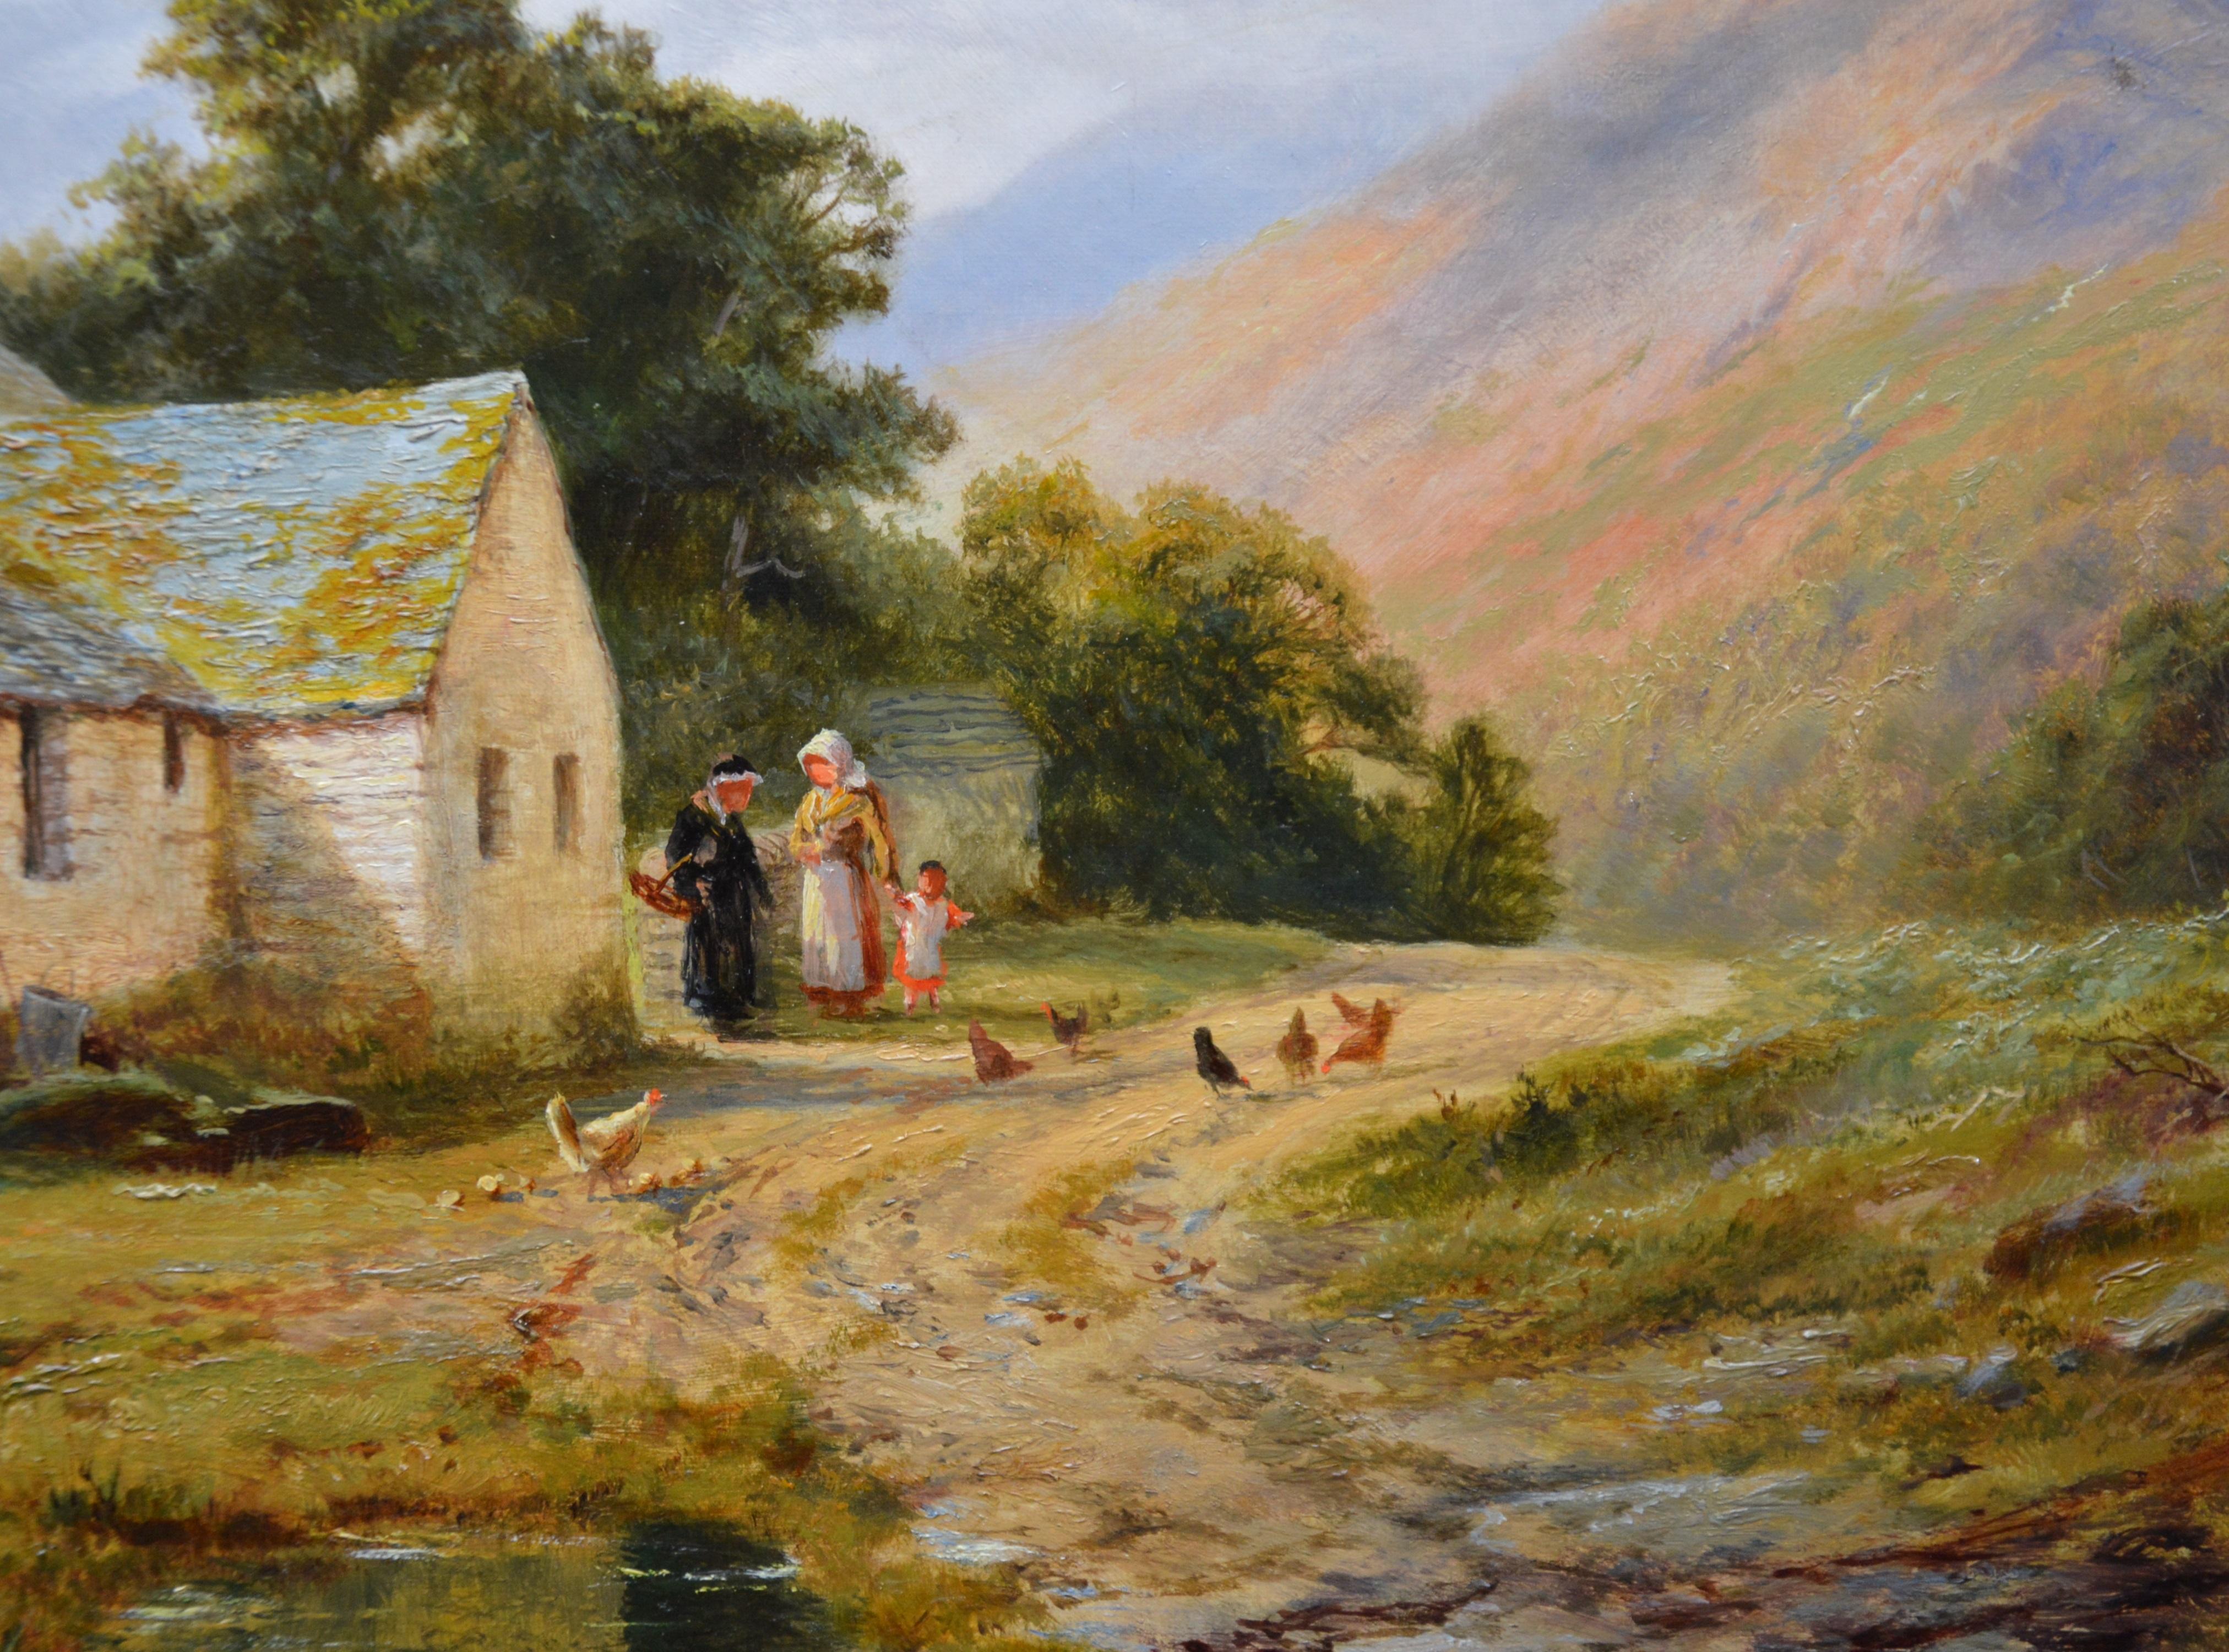 Lledr Valley - 19th Century Summer Landscape Oil Painting of Snowdonia Wales 1